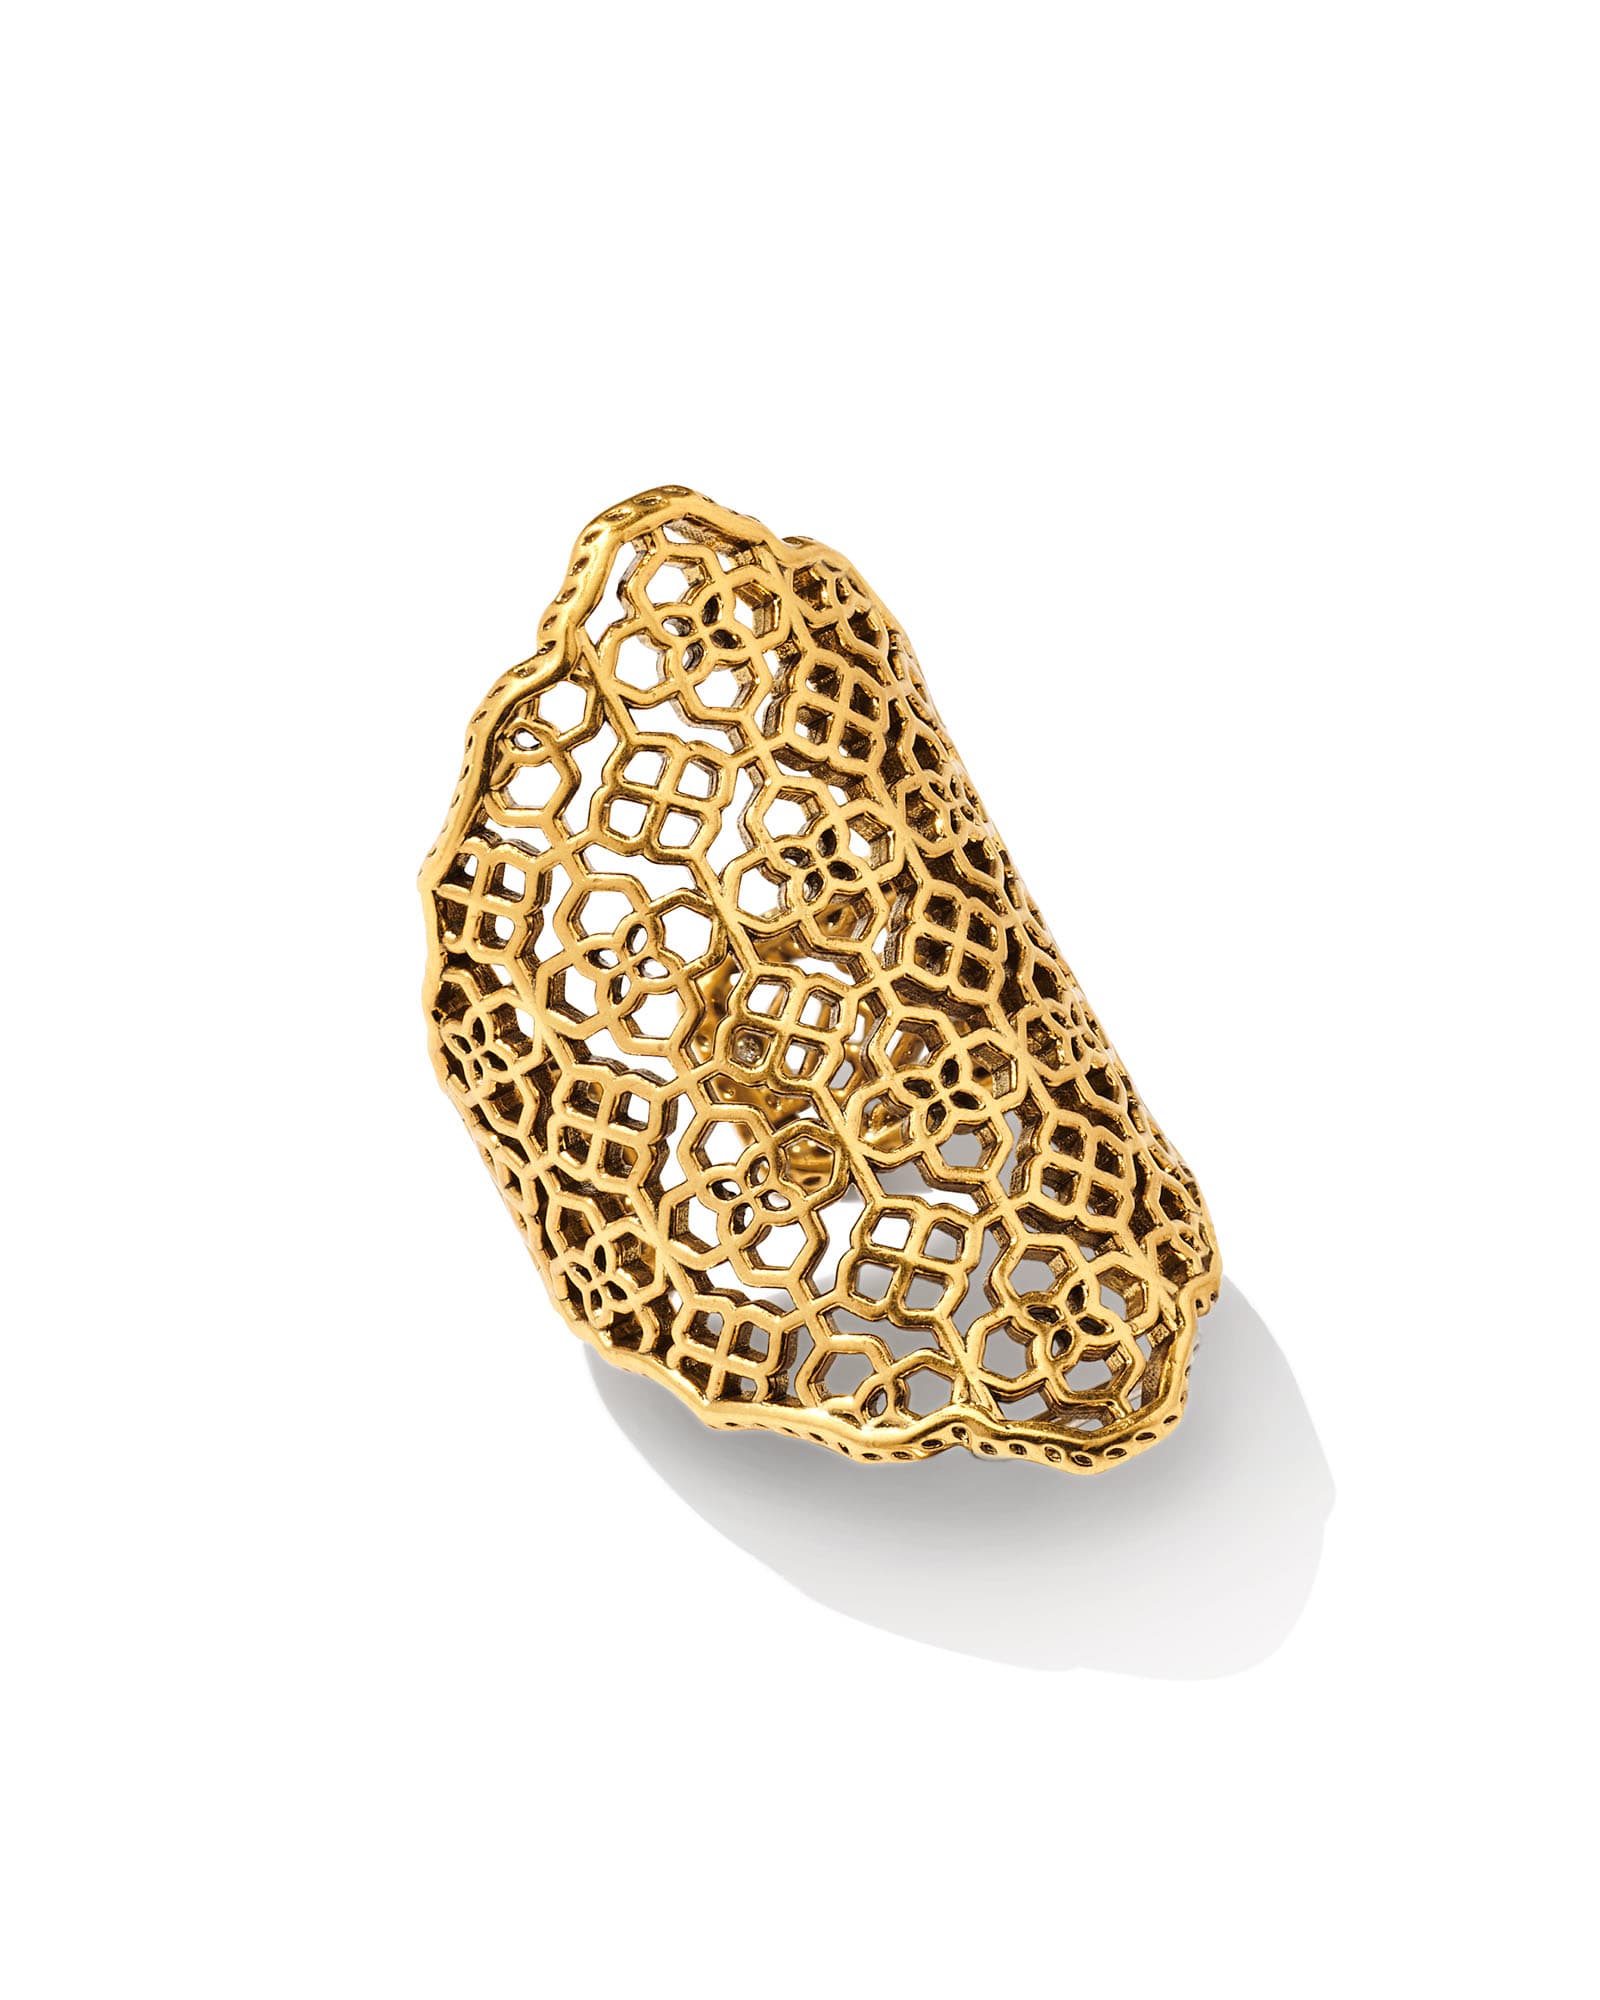 Kendra Scott Boone Small Cocktail Ring in Vintage Gold | Plated Brass/Metal